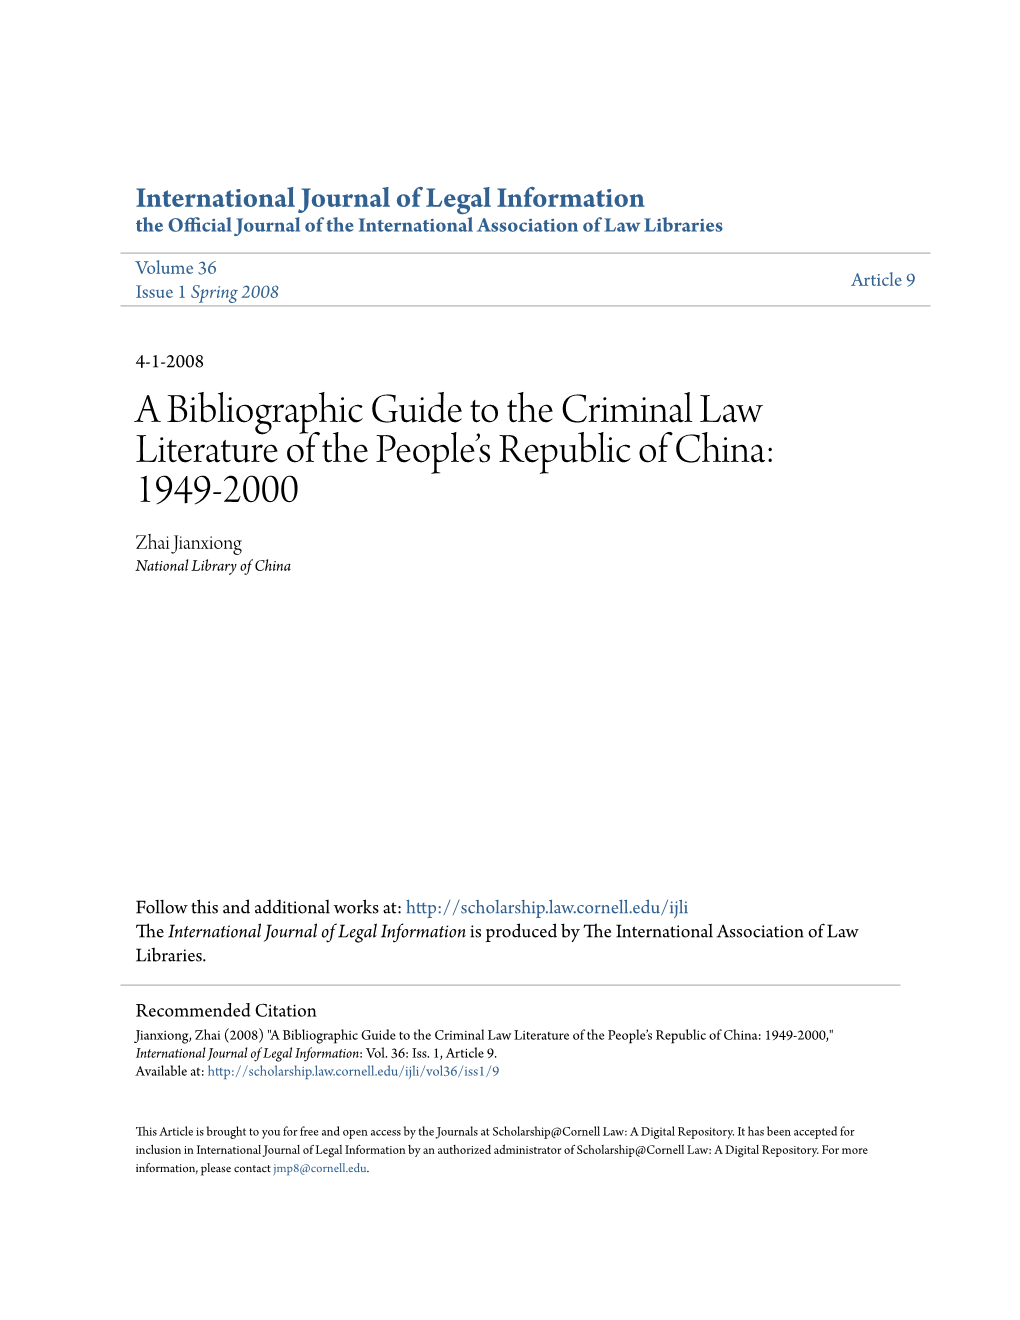 A Bibliographic Guide to the Criminal Law Literature of the People's